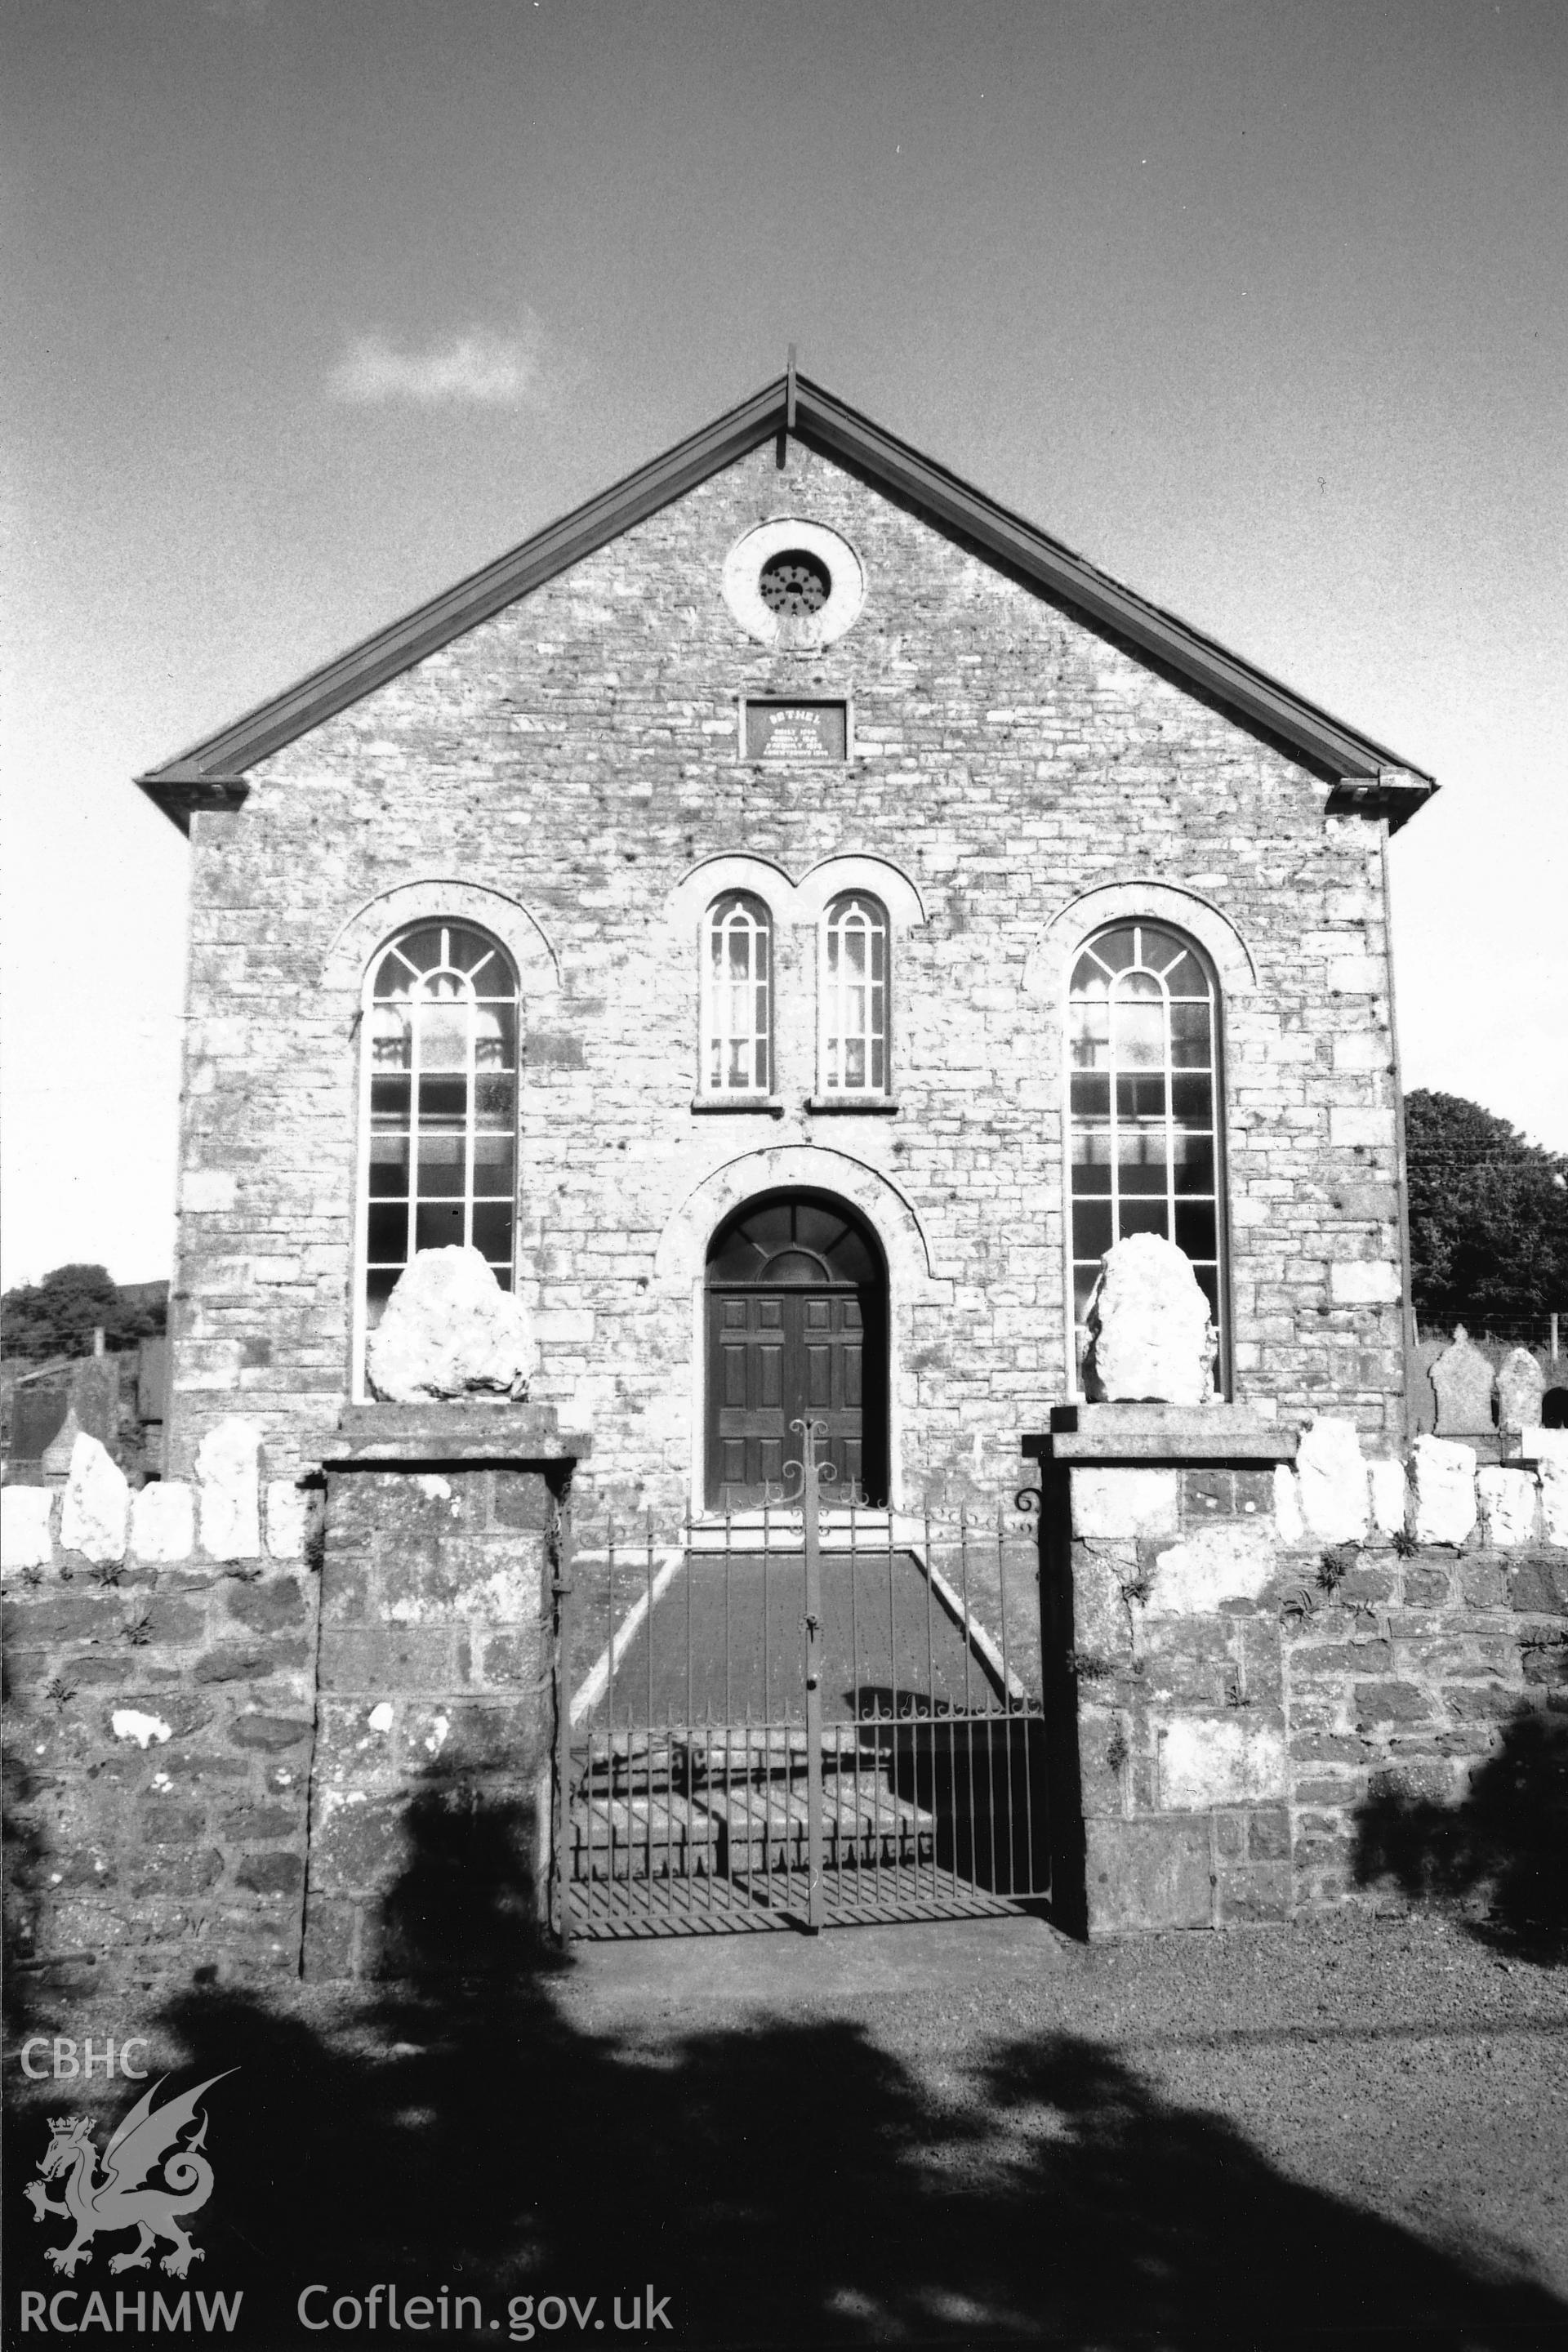 Digital copy of a black and white photograph showing view of Bethel Baptist Chapel, Mynachlog Ddu, taken by Robert Scourfield, 1995.